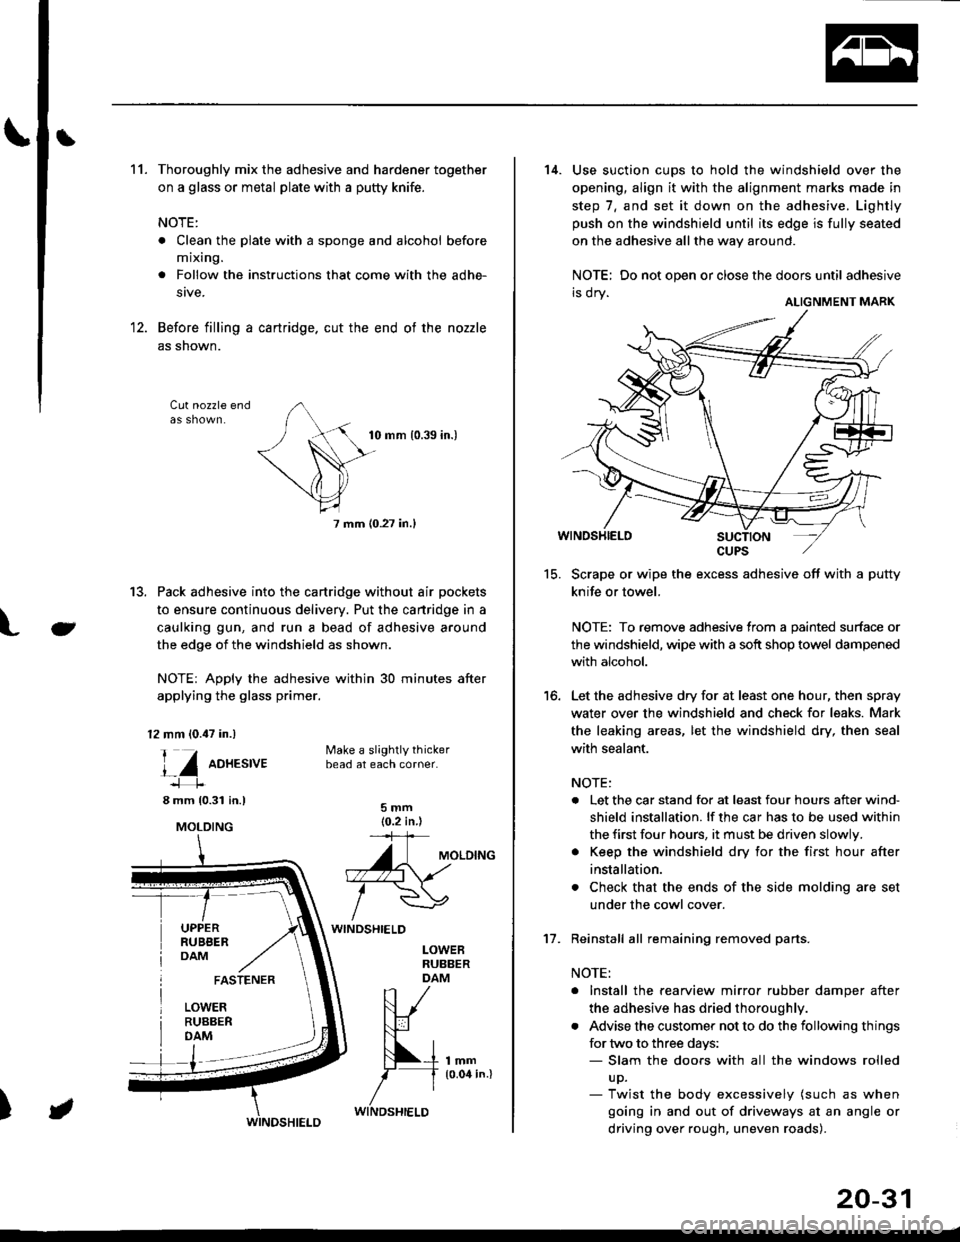 HONDA CIVIC 1998 6.G Workshop Manual 3
11.Thoroughly mix the adhesive and hardener together
on a glass or metal plate with a putty knife.
NOTE:
. Clean the plate with a sponge and alcohol before
mixing.
. Follow the instructions that com